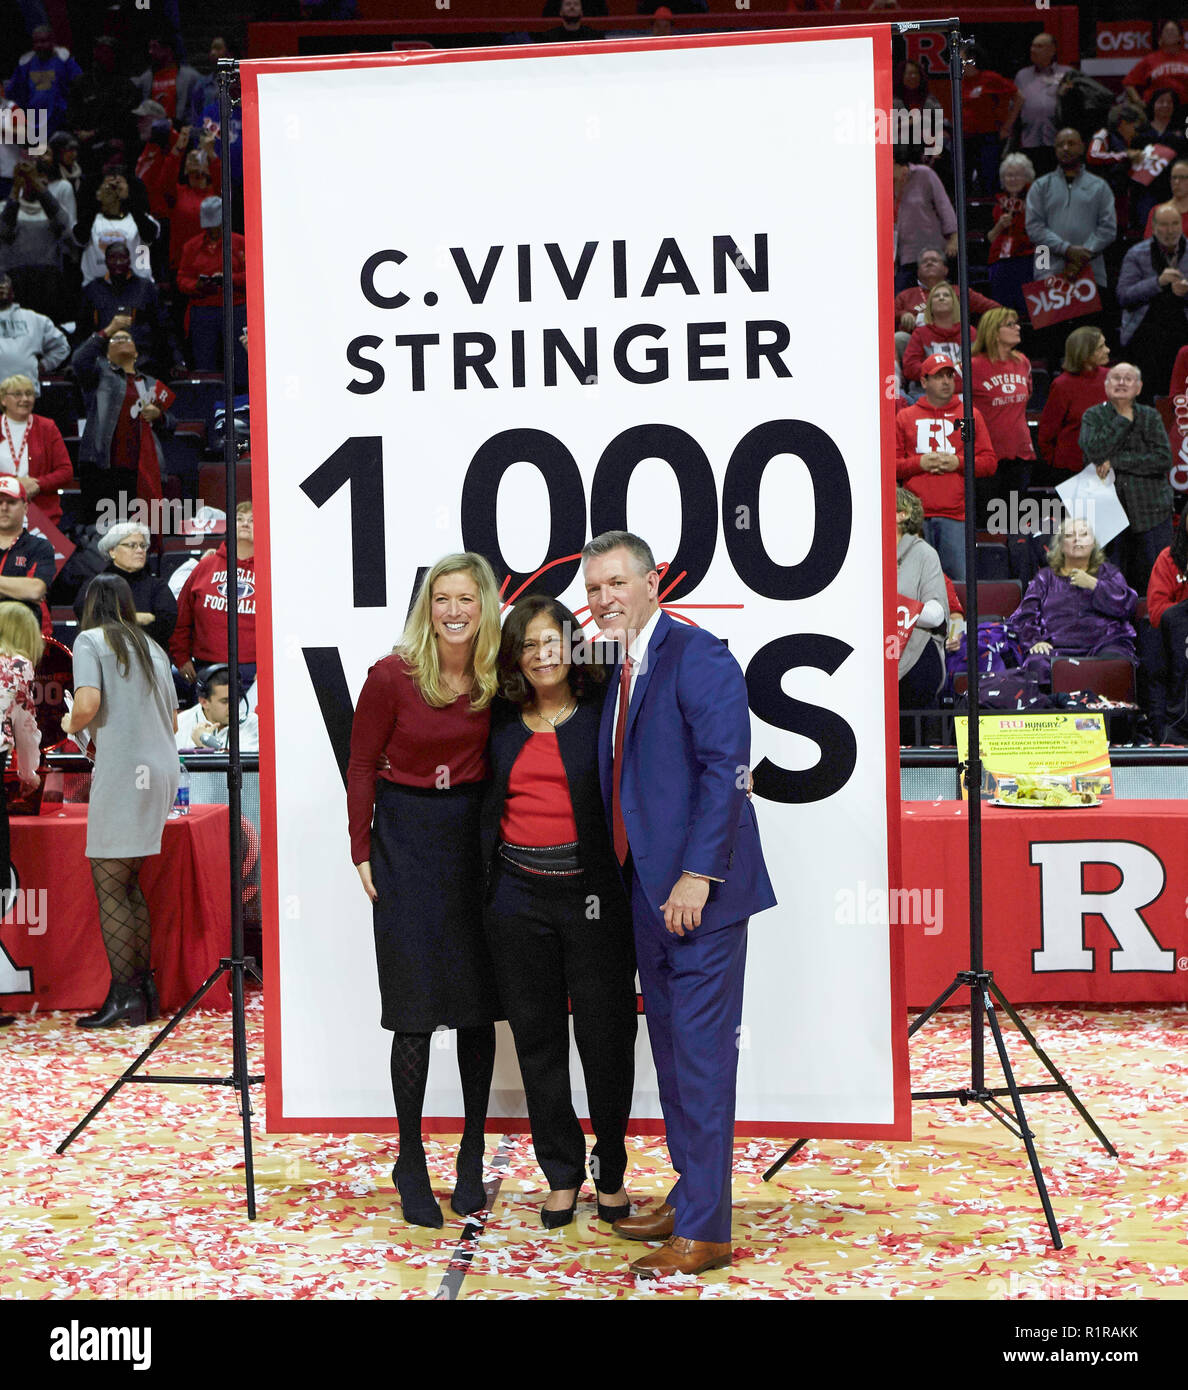 Piscataway, New Jersey, USA. 13th Nov, 2018. Rutgers Athletic Director Patrick Hobbs and Deputy Director of Athletics Sarah Baumgartner celebrate Rutgers women basketball head coach C. Vivian Stringer 1,000 career win after a game between the Rutgers Scarlet Knights and the Central Connecticut Blue Devils at Rutgers Athletic Center in Piscataway, New Jersey. Rutgers defeated Central Connecticut 74-44. Duncan Williams/CSM/Alamy Live News Stock Photo